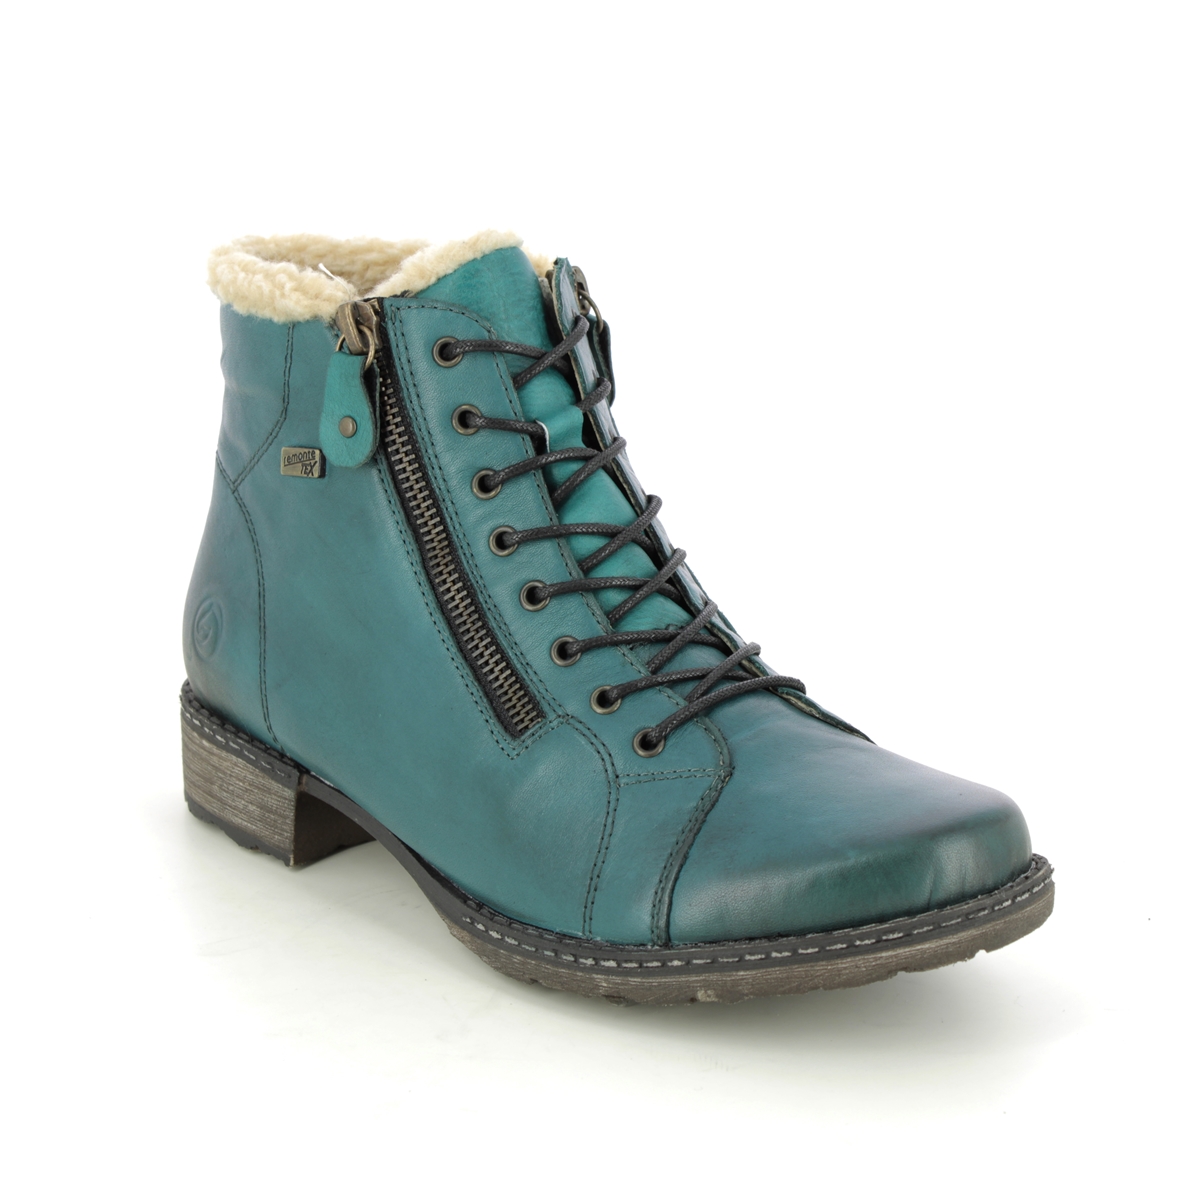 Remonte Peesienna Tex Turquoise Leather Womens Lace Up Boots D4372-12 In Size 38 In Plain Turquoise Leather